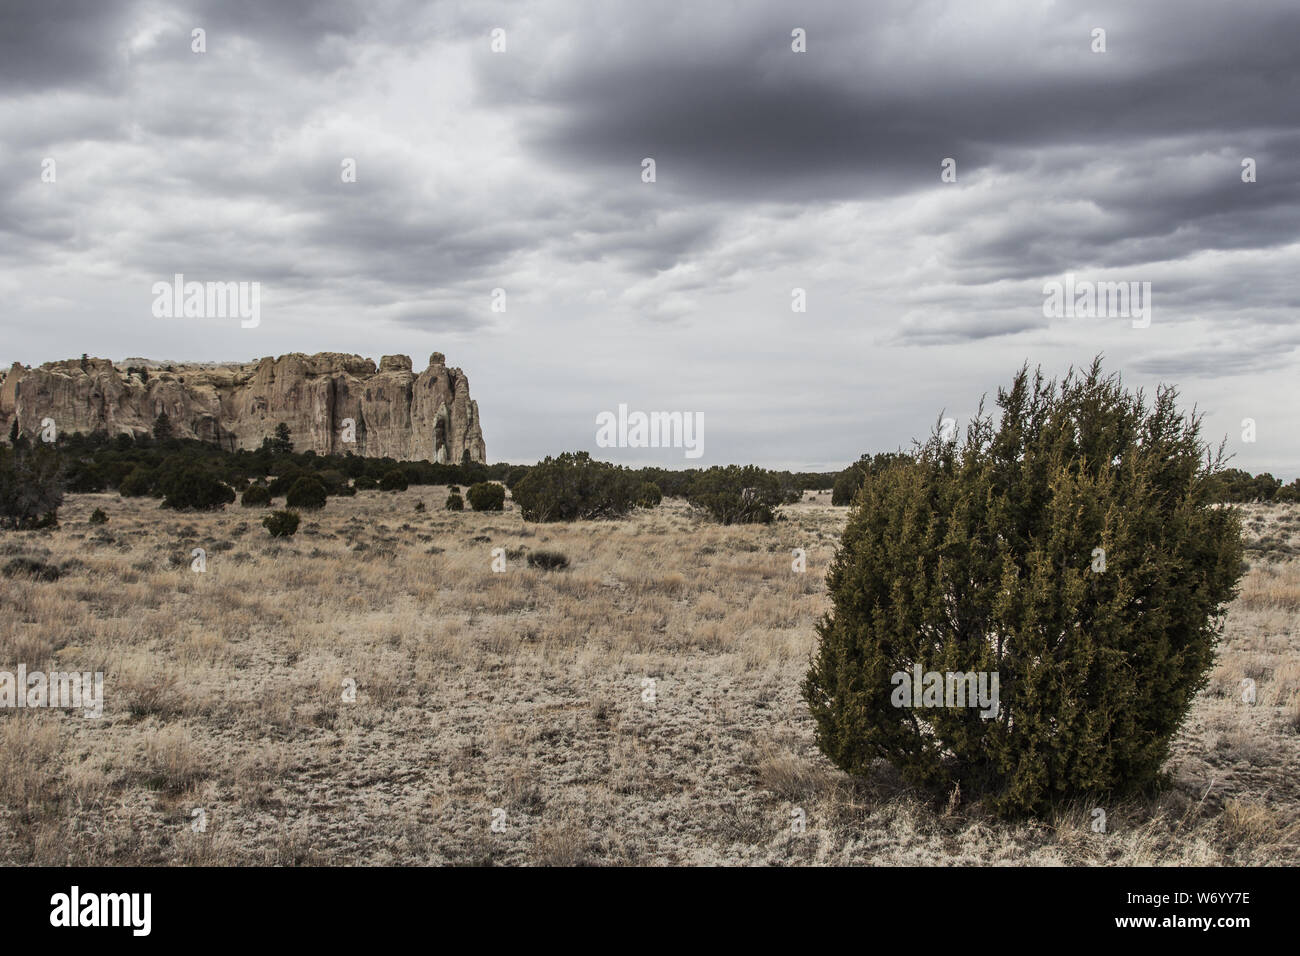 El Morro National Monument in New Mexico Stock Photo